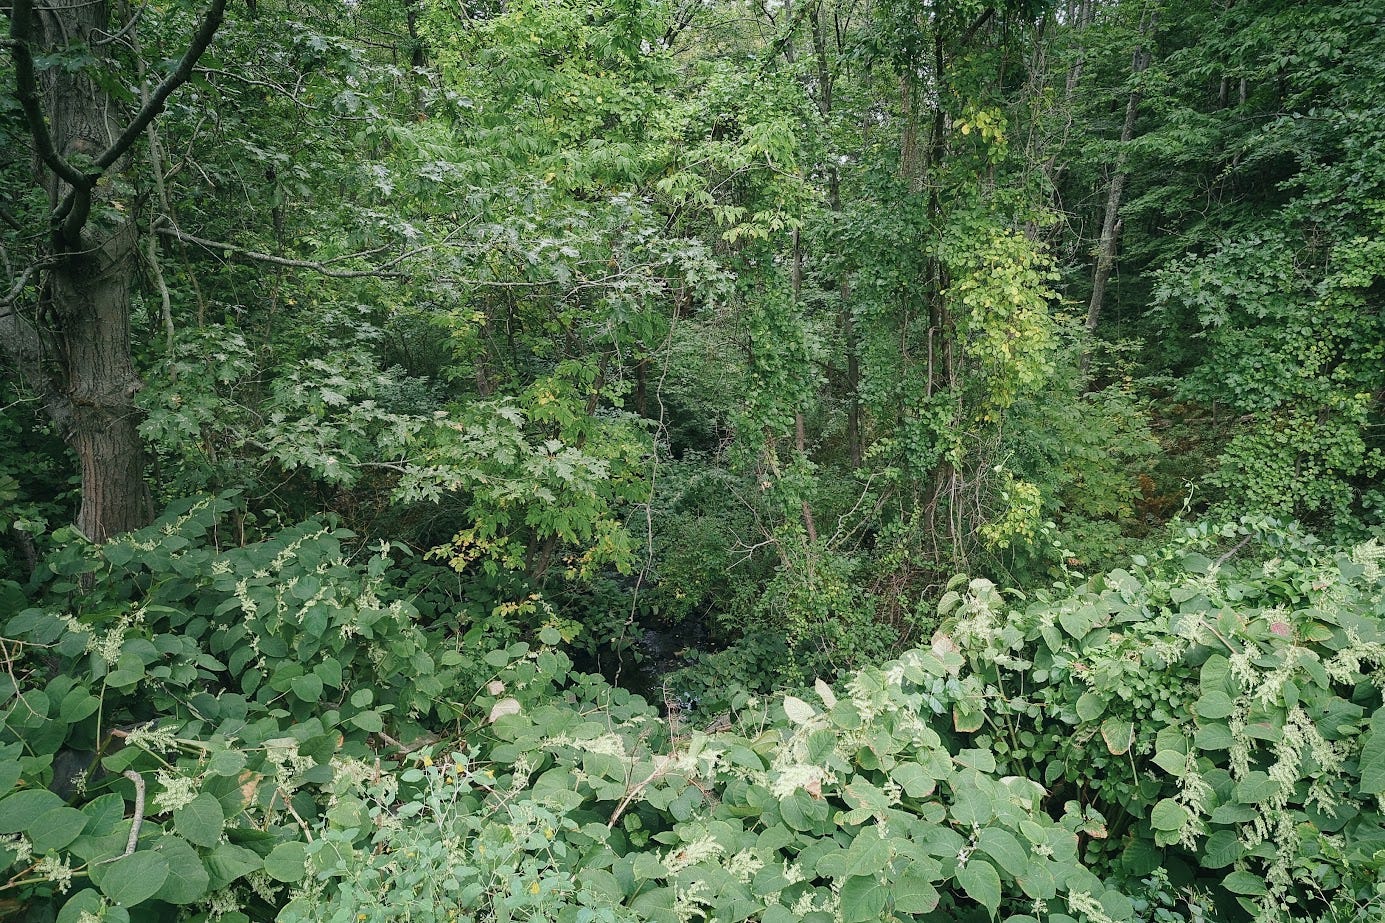 A photo of a dense thicket of trees and vines in varying shades of green. Deep in the center, there is a stream running through, down below the leafy greenness of all the trees.